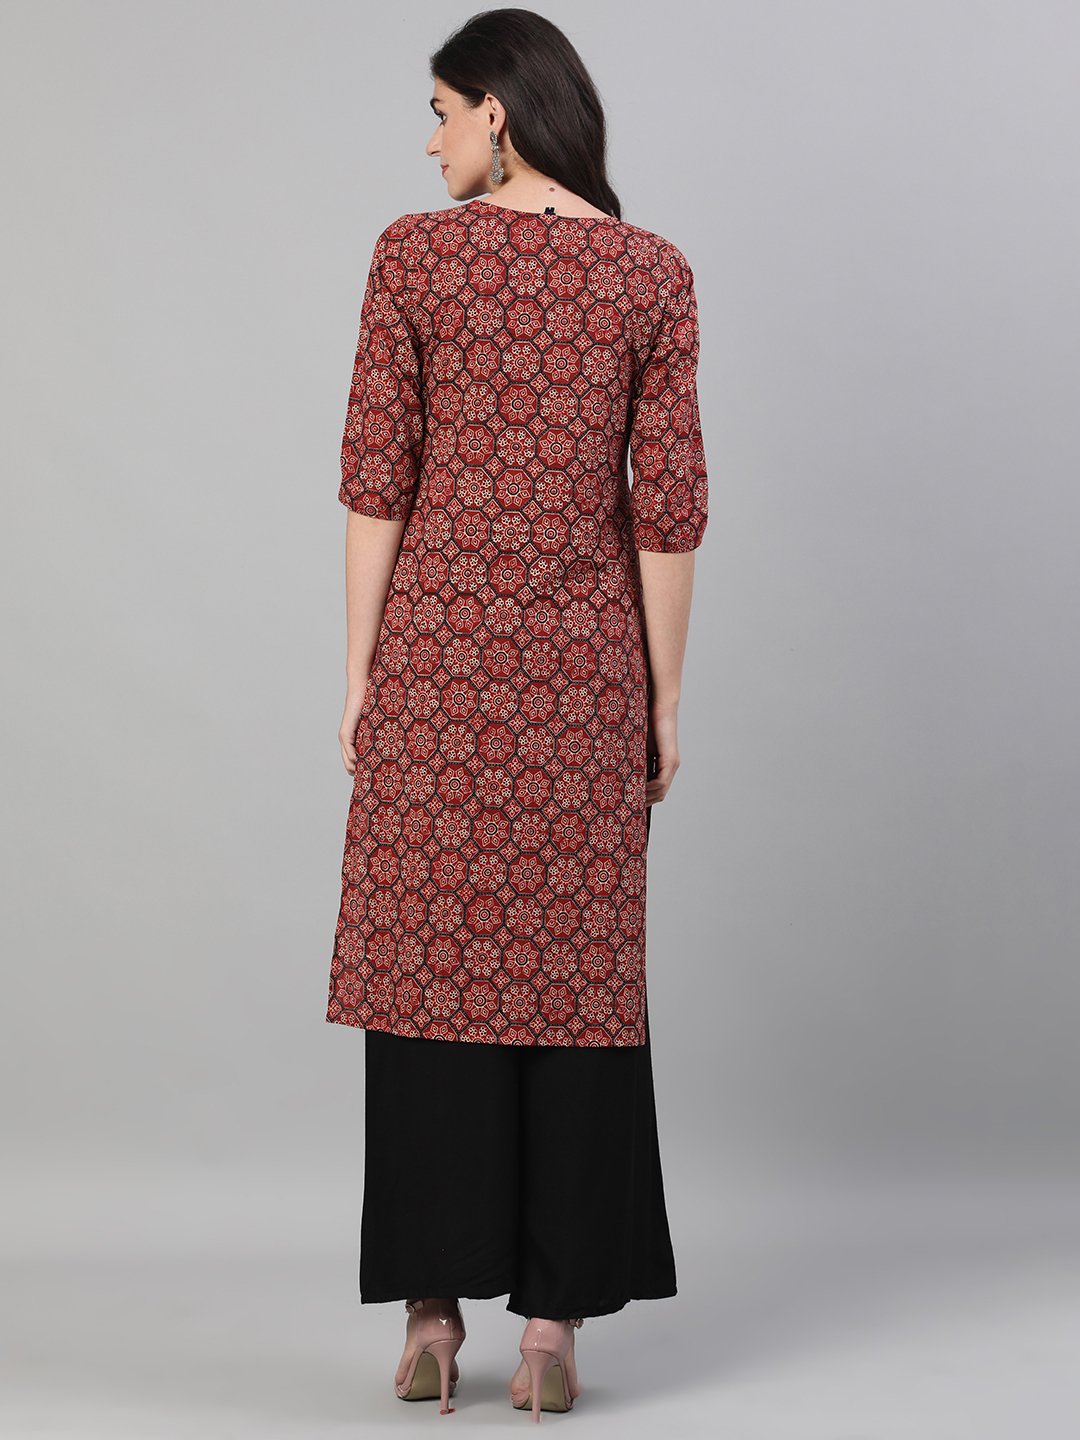 Women's Maroon Calf Length Three-Quarter Sleeves Straight Ethnic Motif Printed Cotton Kurta With Pockets And Face Mask - Nayo Clothing